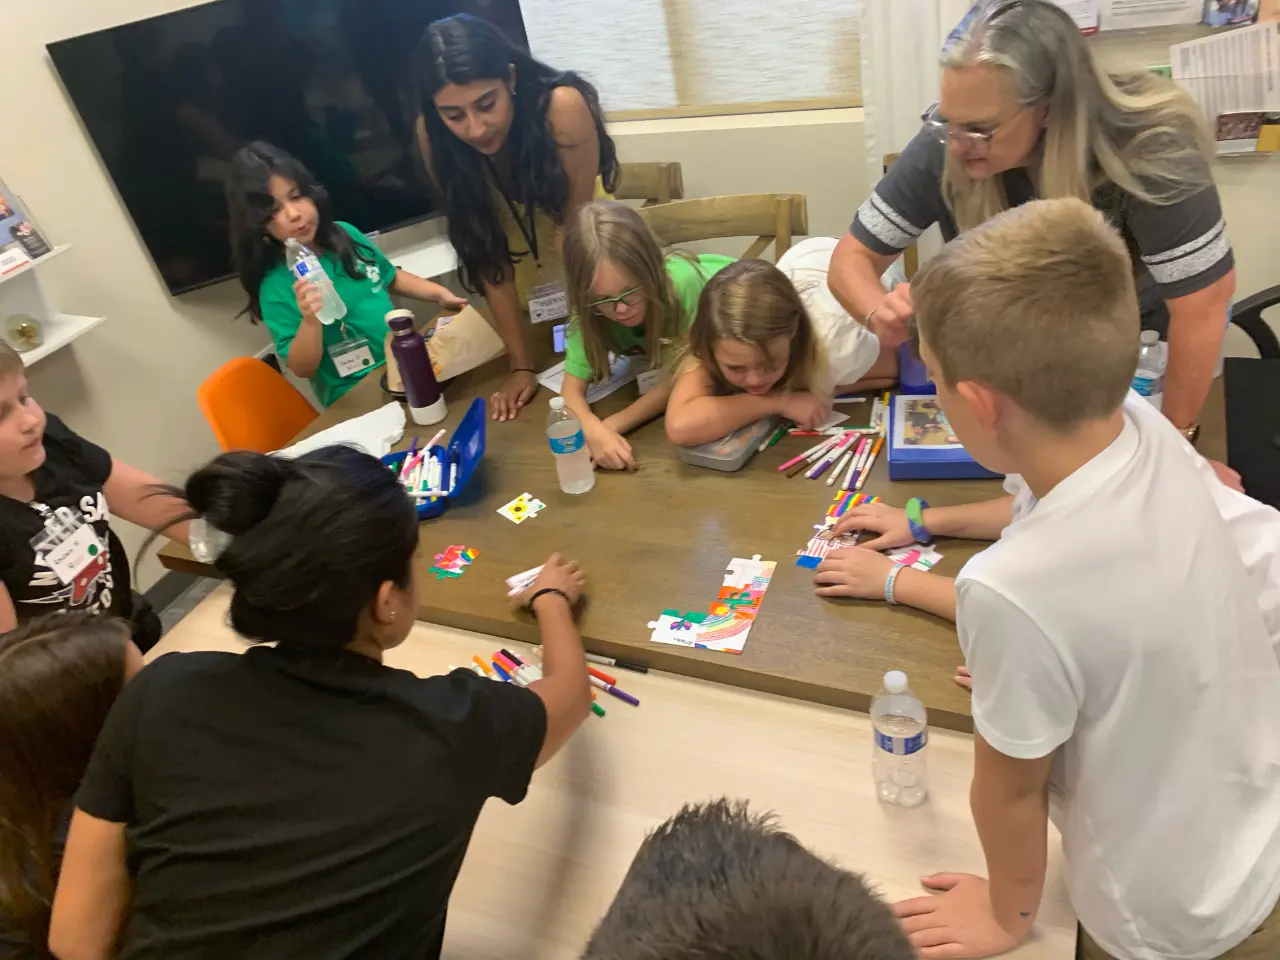 A group of children and adults around a table, engaged in a puzzle activity indoors.